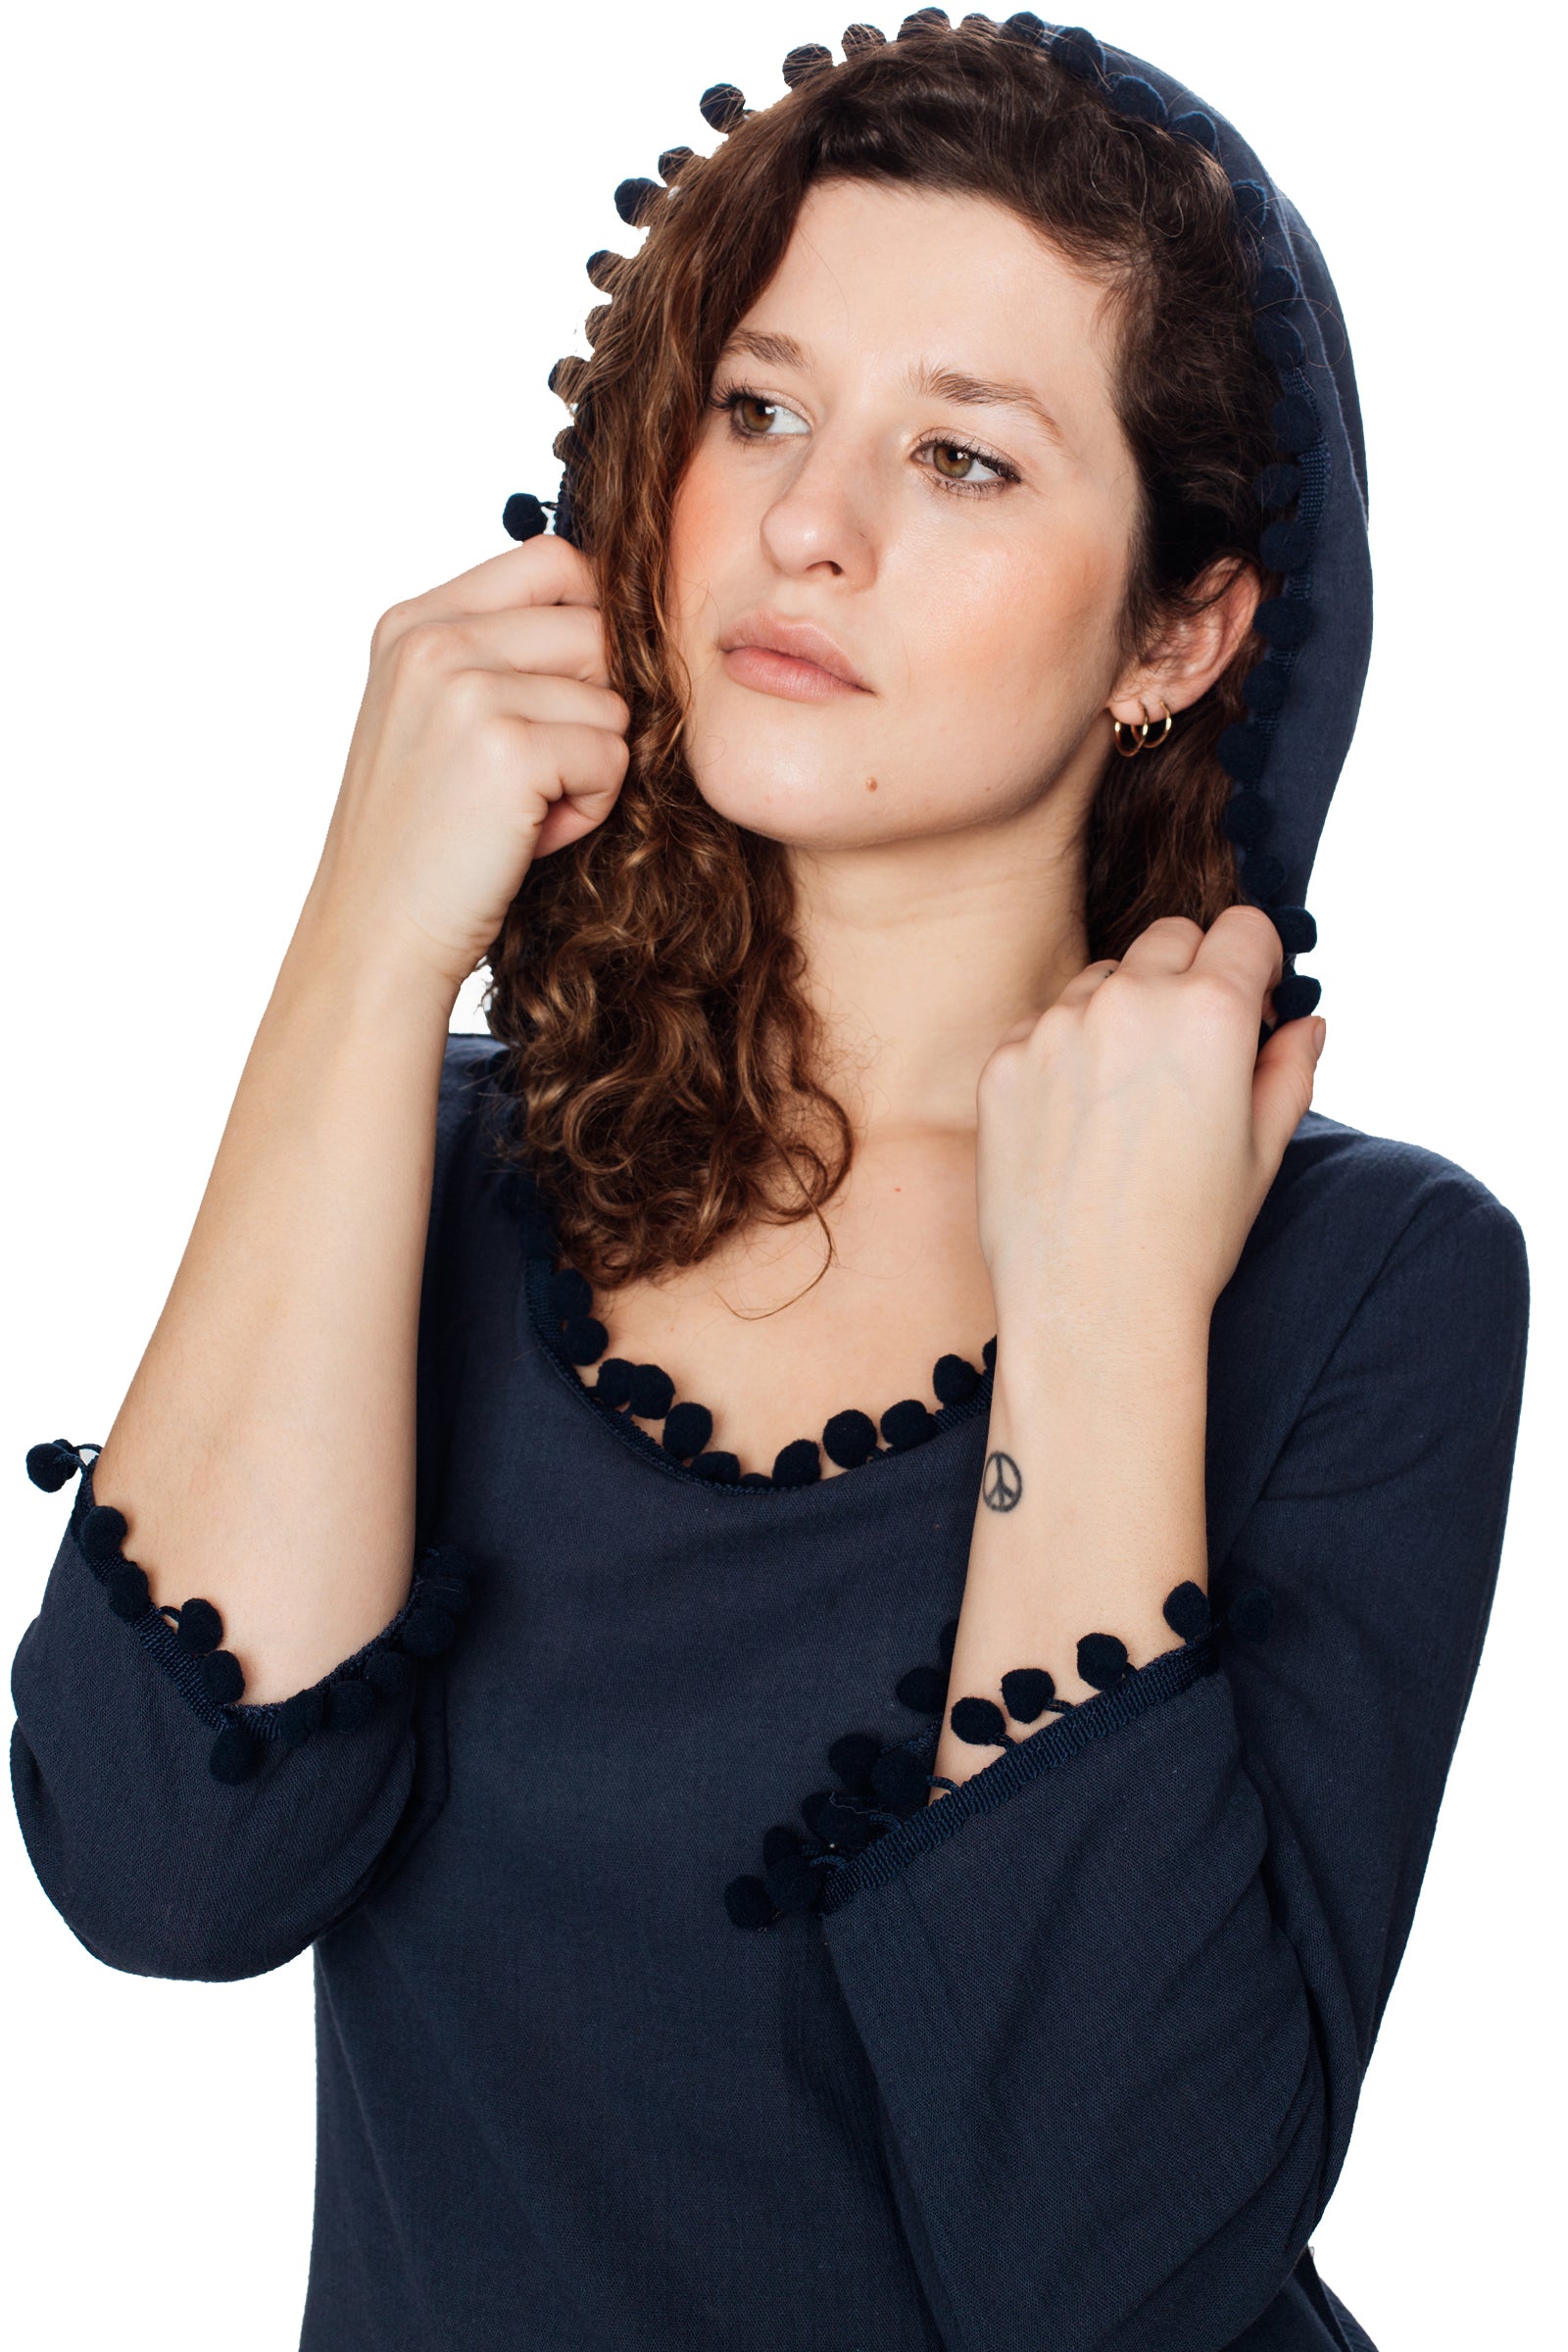 Navy Blue Hooded Long Sleeve Cotton Coverup